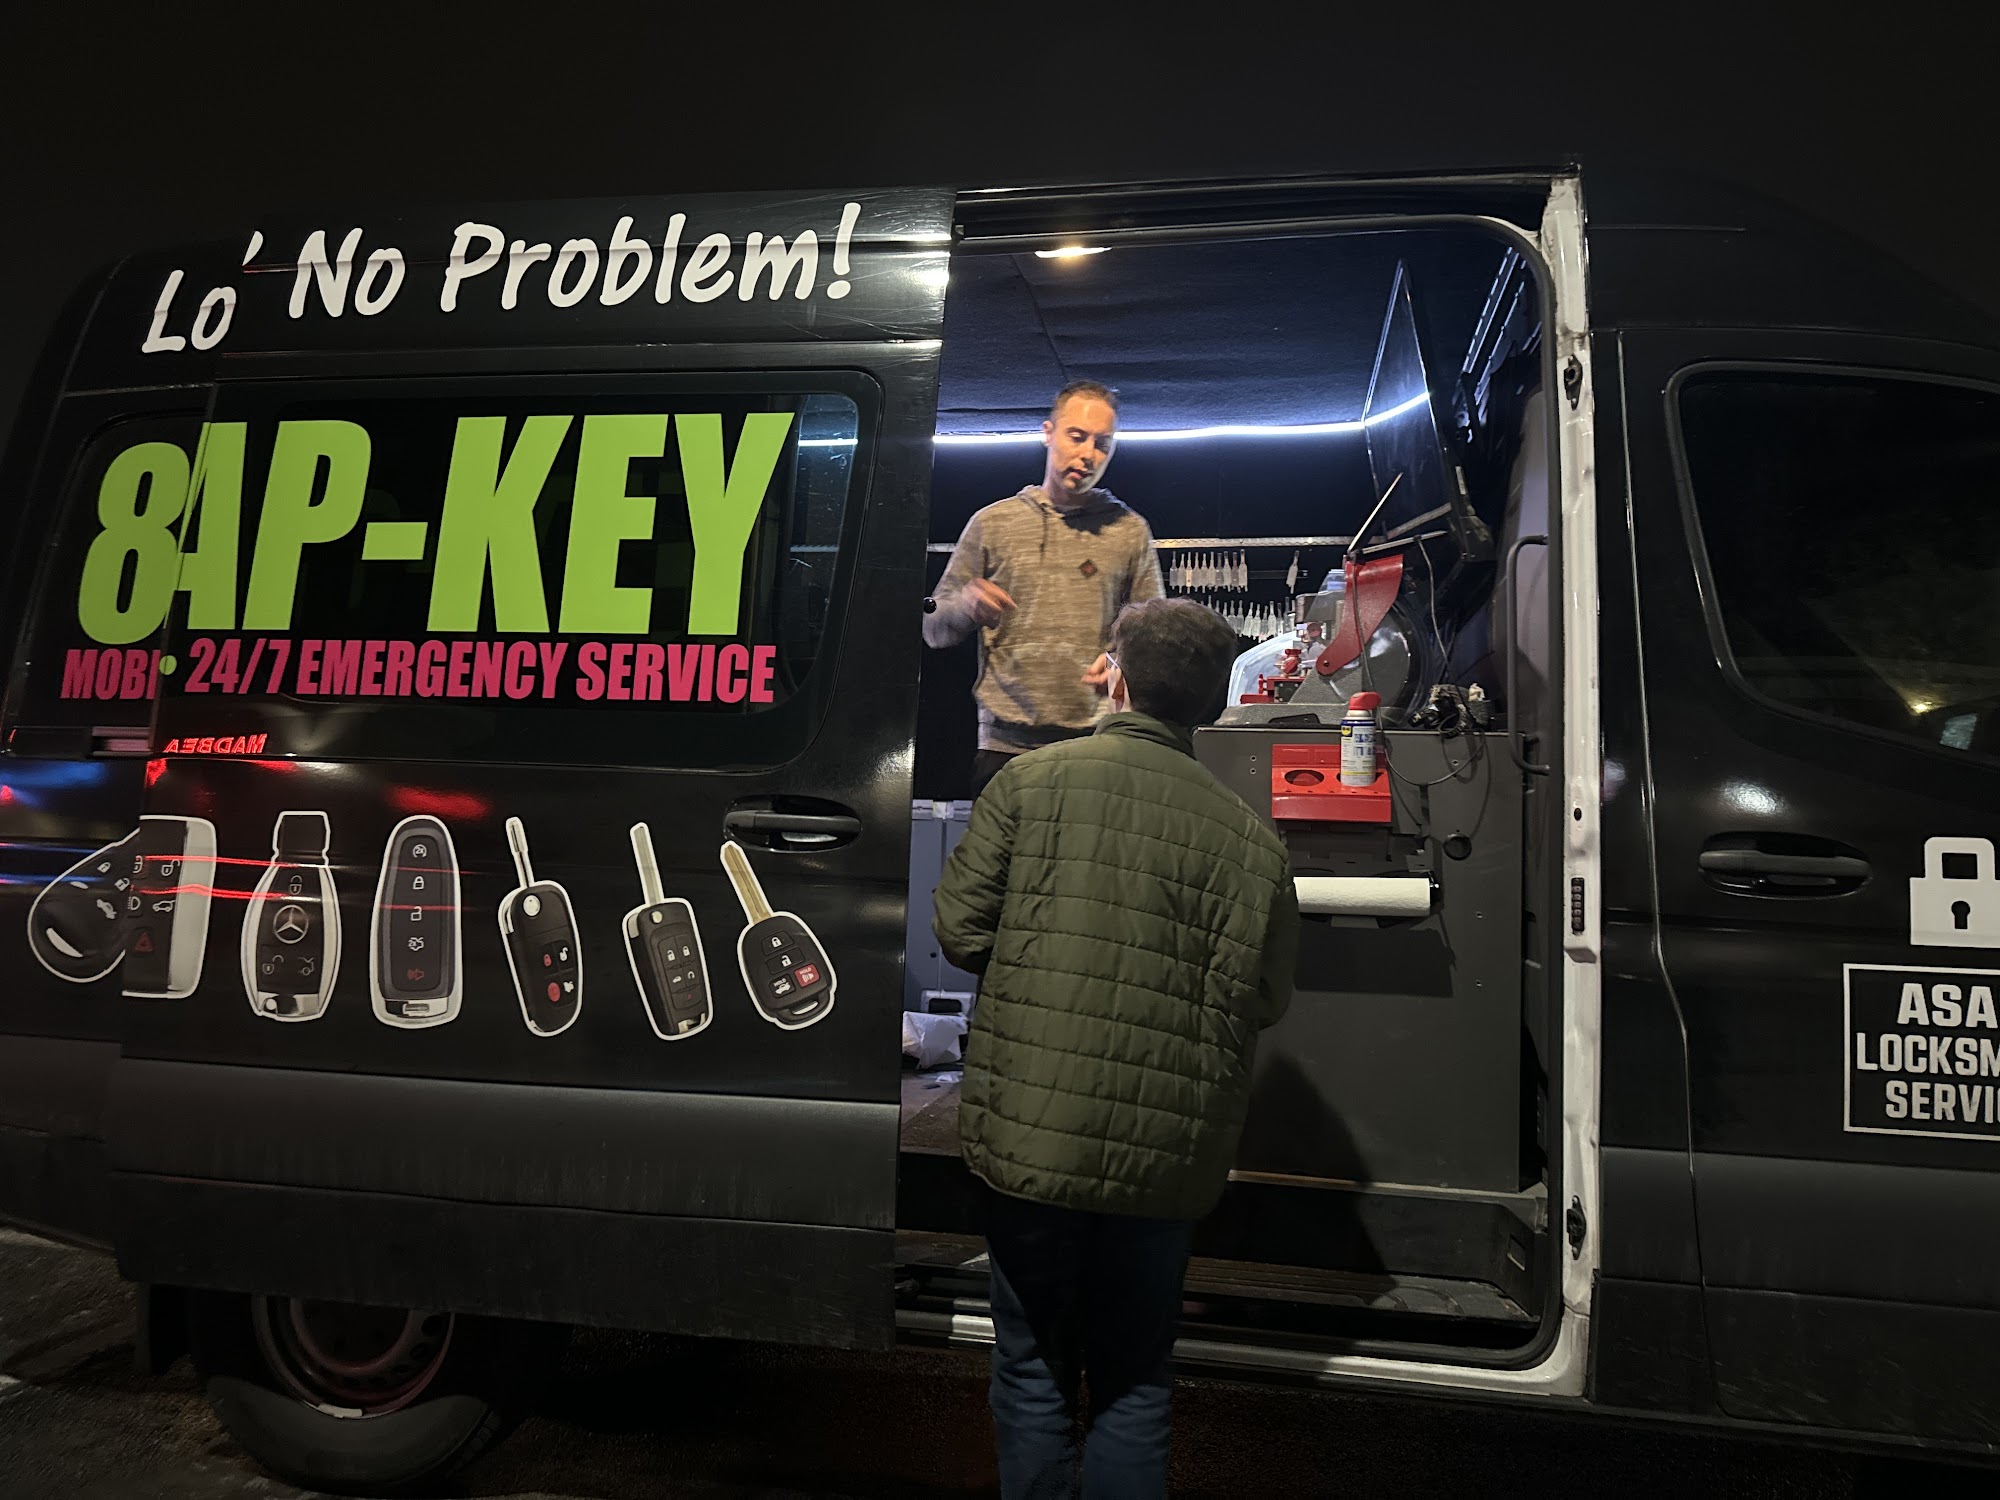 ASAP Lockout and Locksmith Services